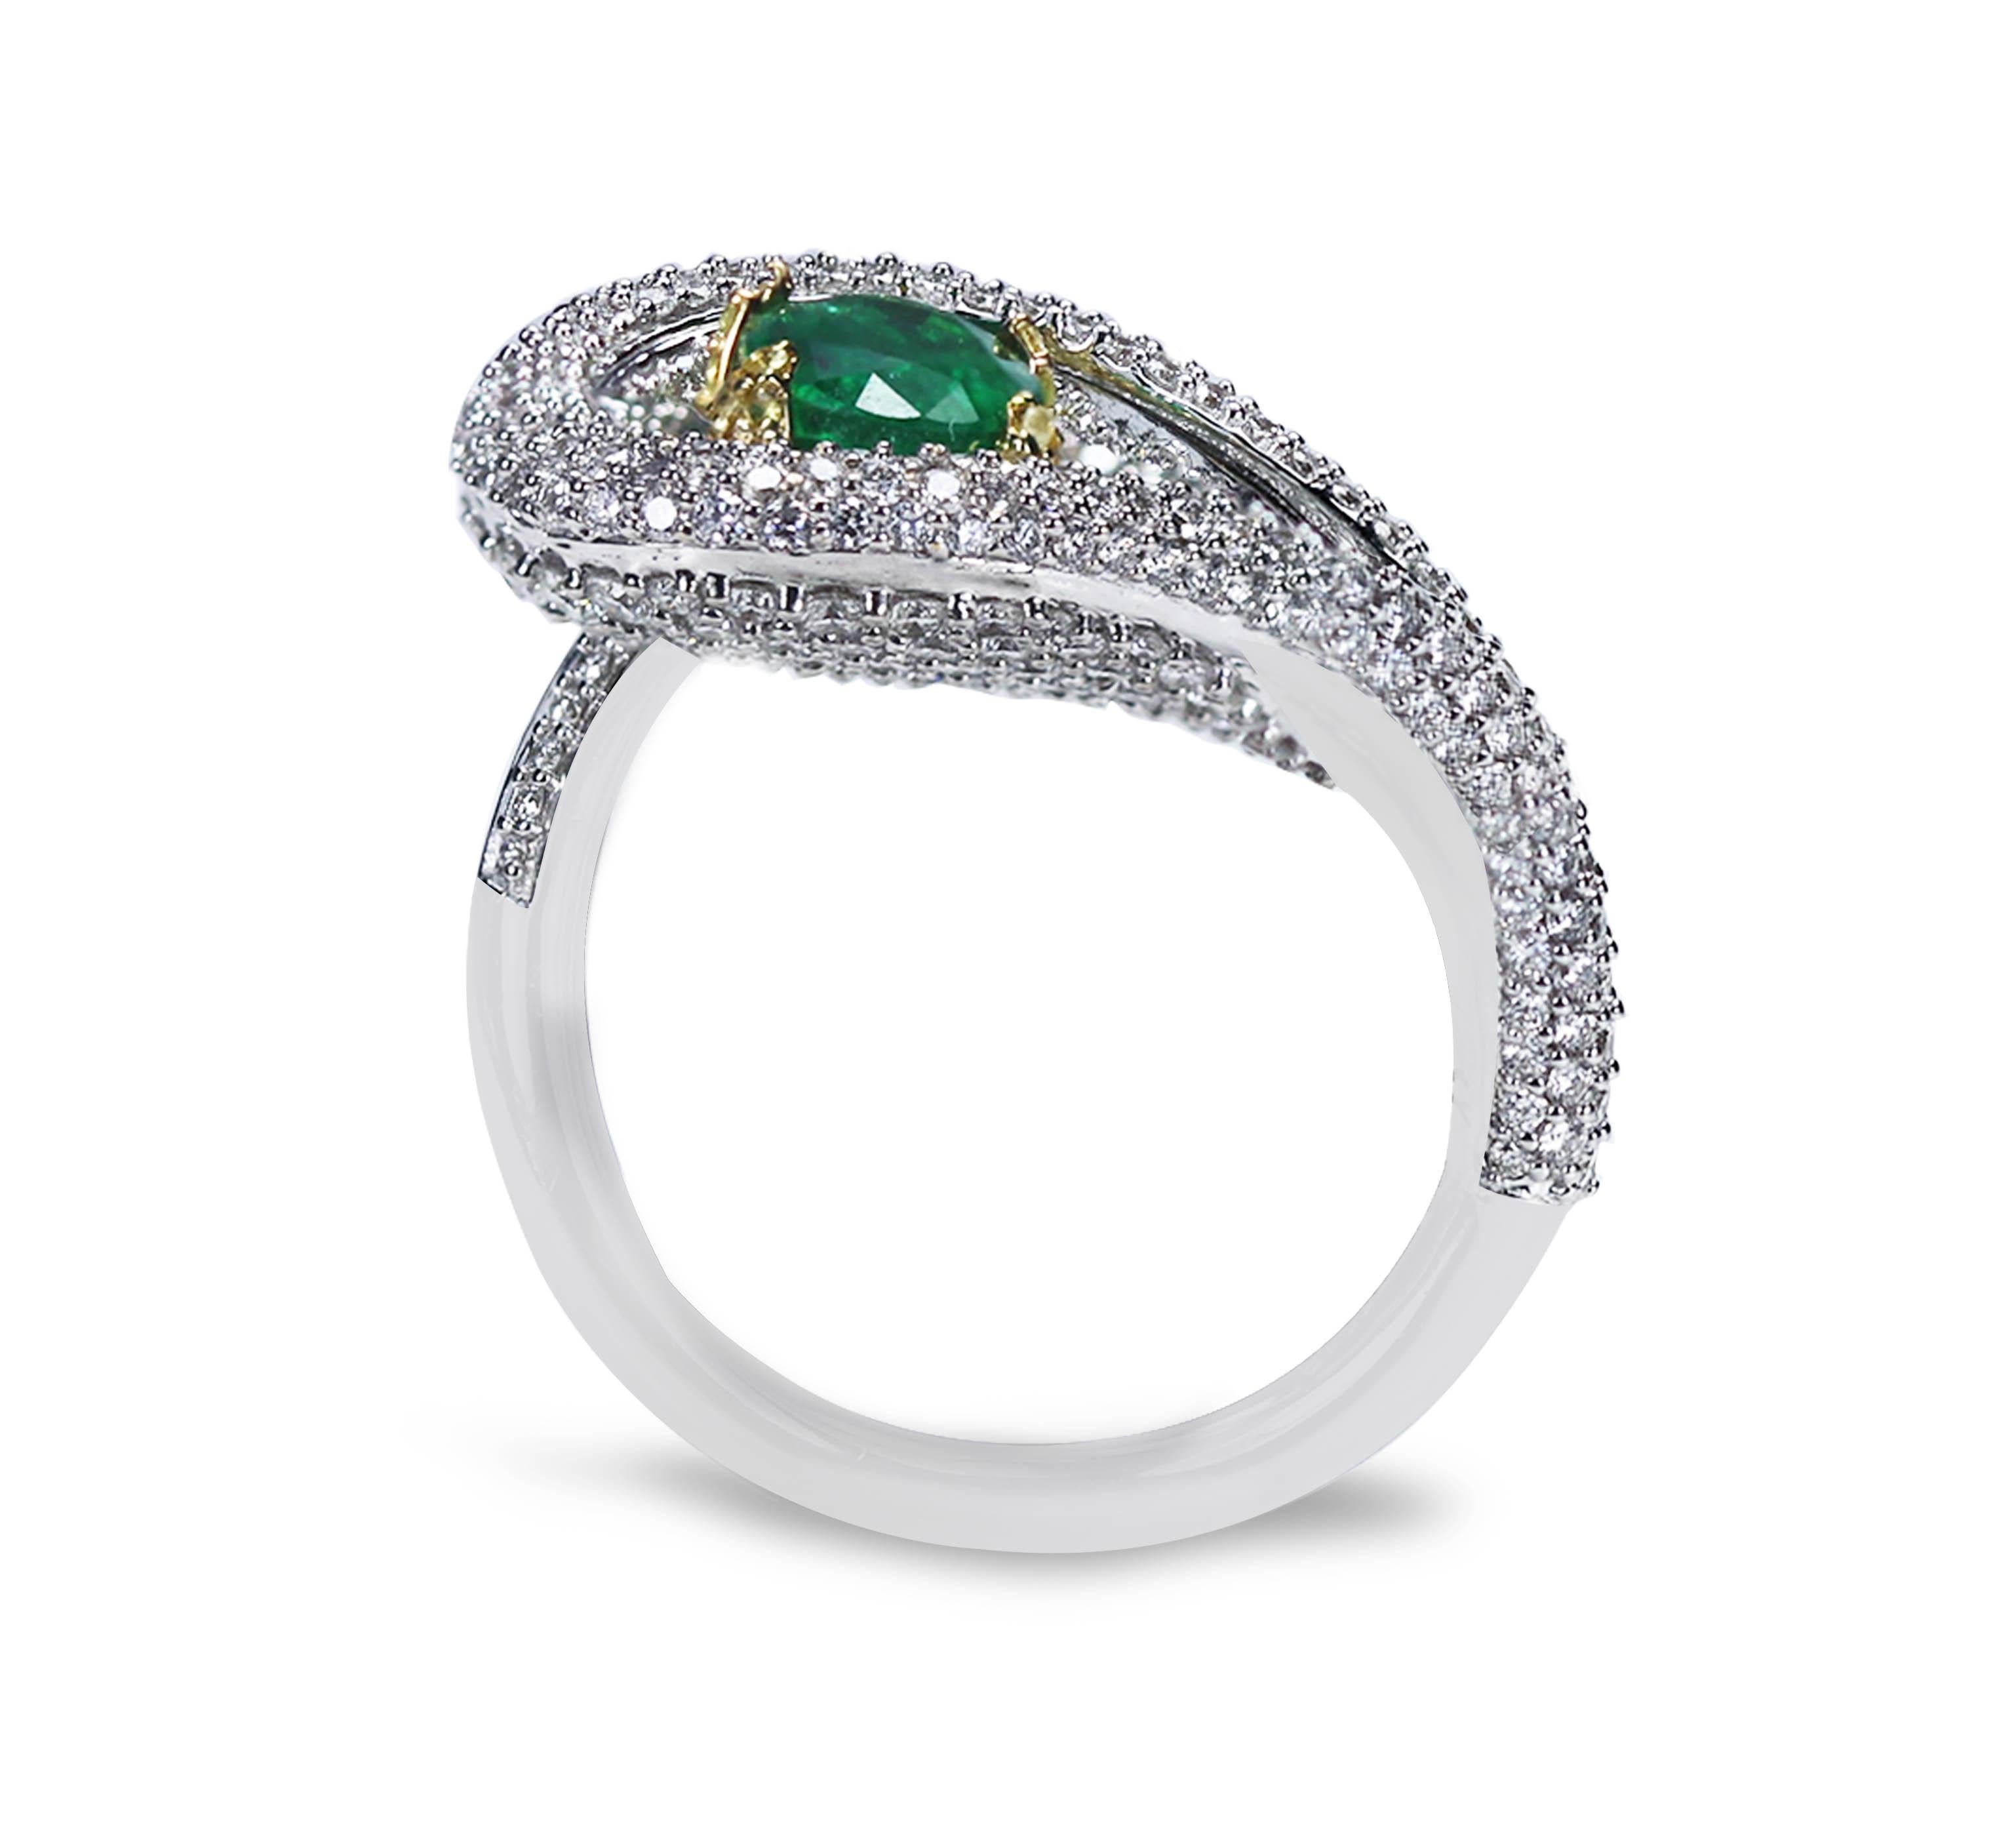 Studio Rêves Emeralds and Diamonds Drop Cocktail Ring in 18 Karat Gold In New Condition For Sale In Mumbai, Maharashtra